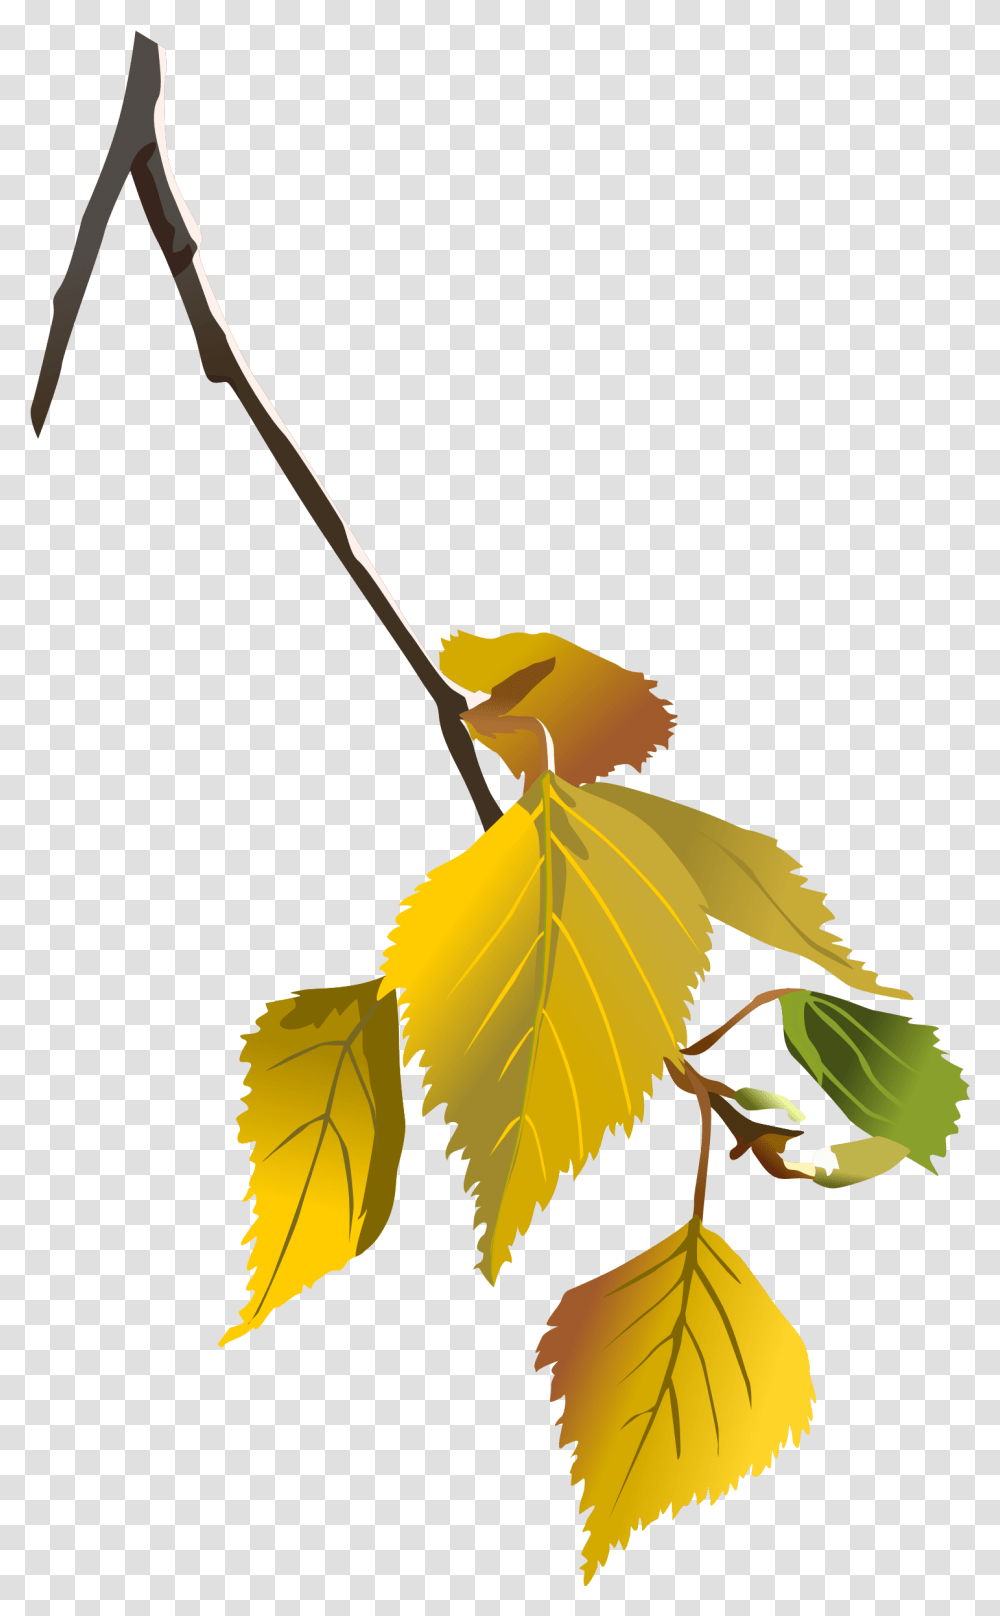 Tree Limb Autumn Leaves Tree Branch Green Tree Birch Tree Leaf Svg, Plant, Photography, Veins, Pottery Transparent Png